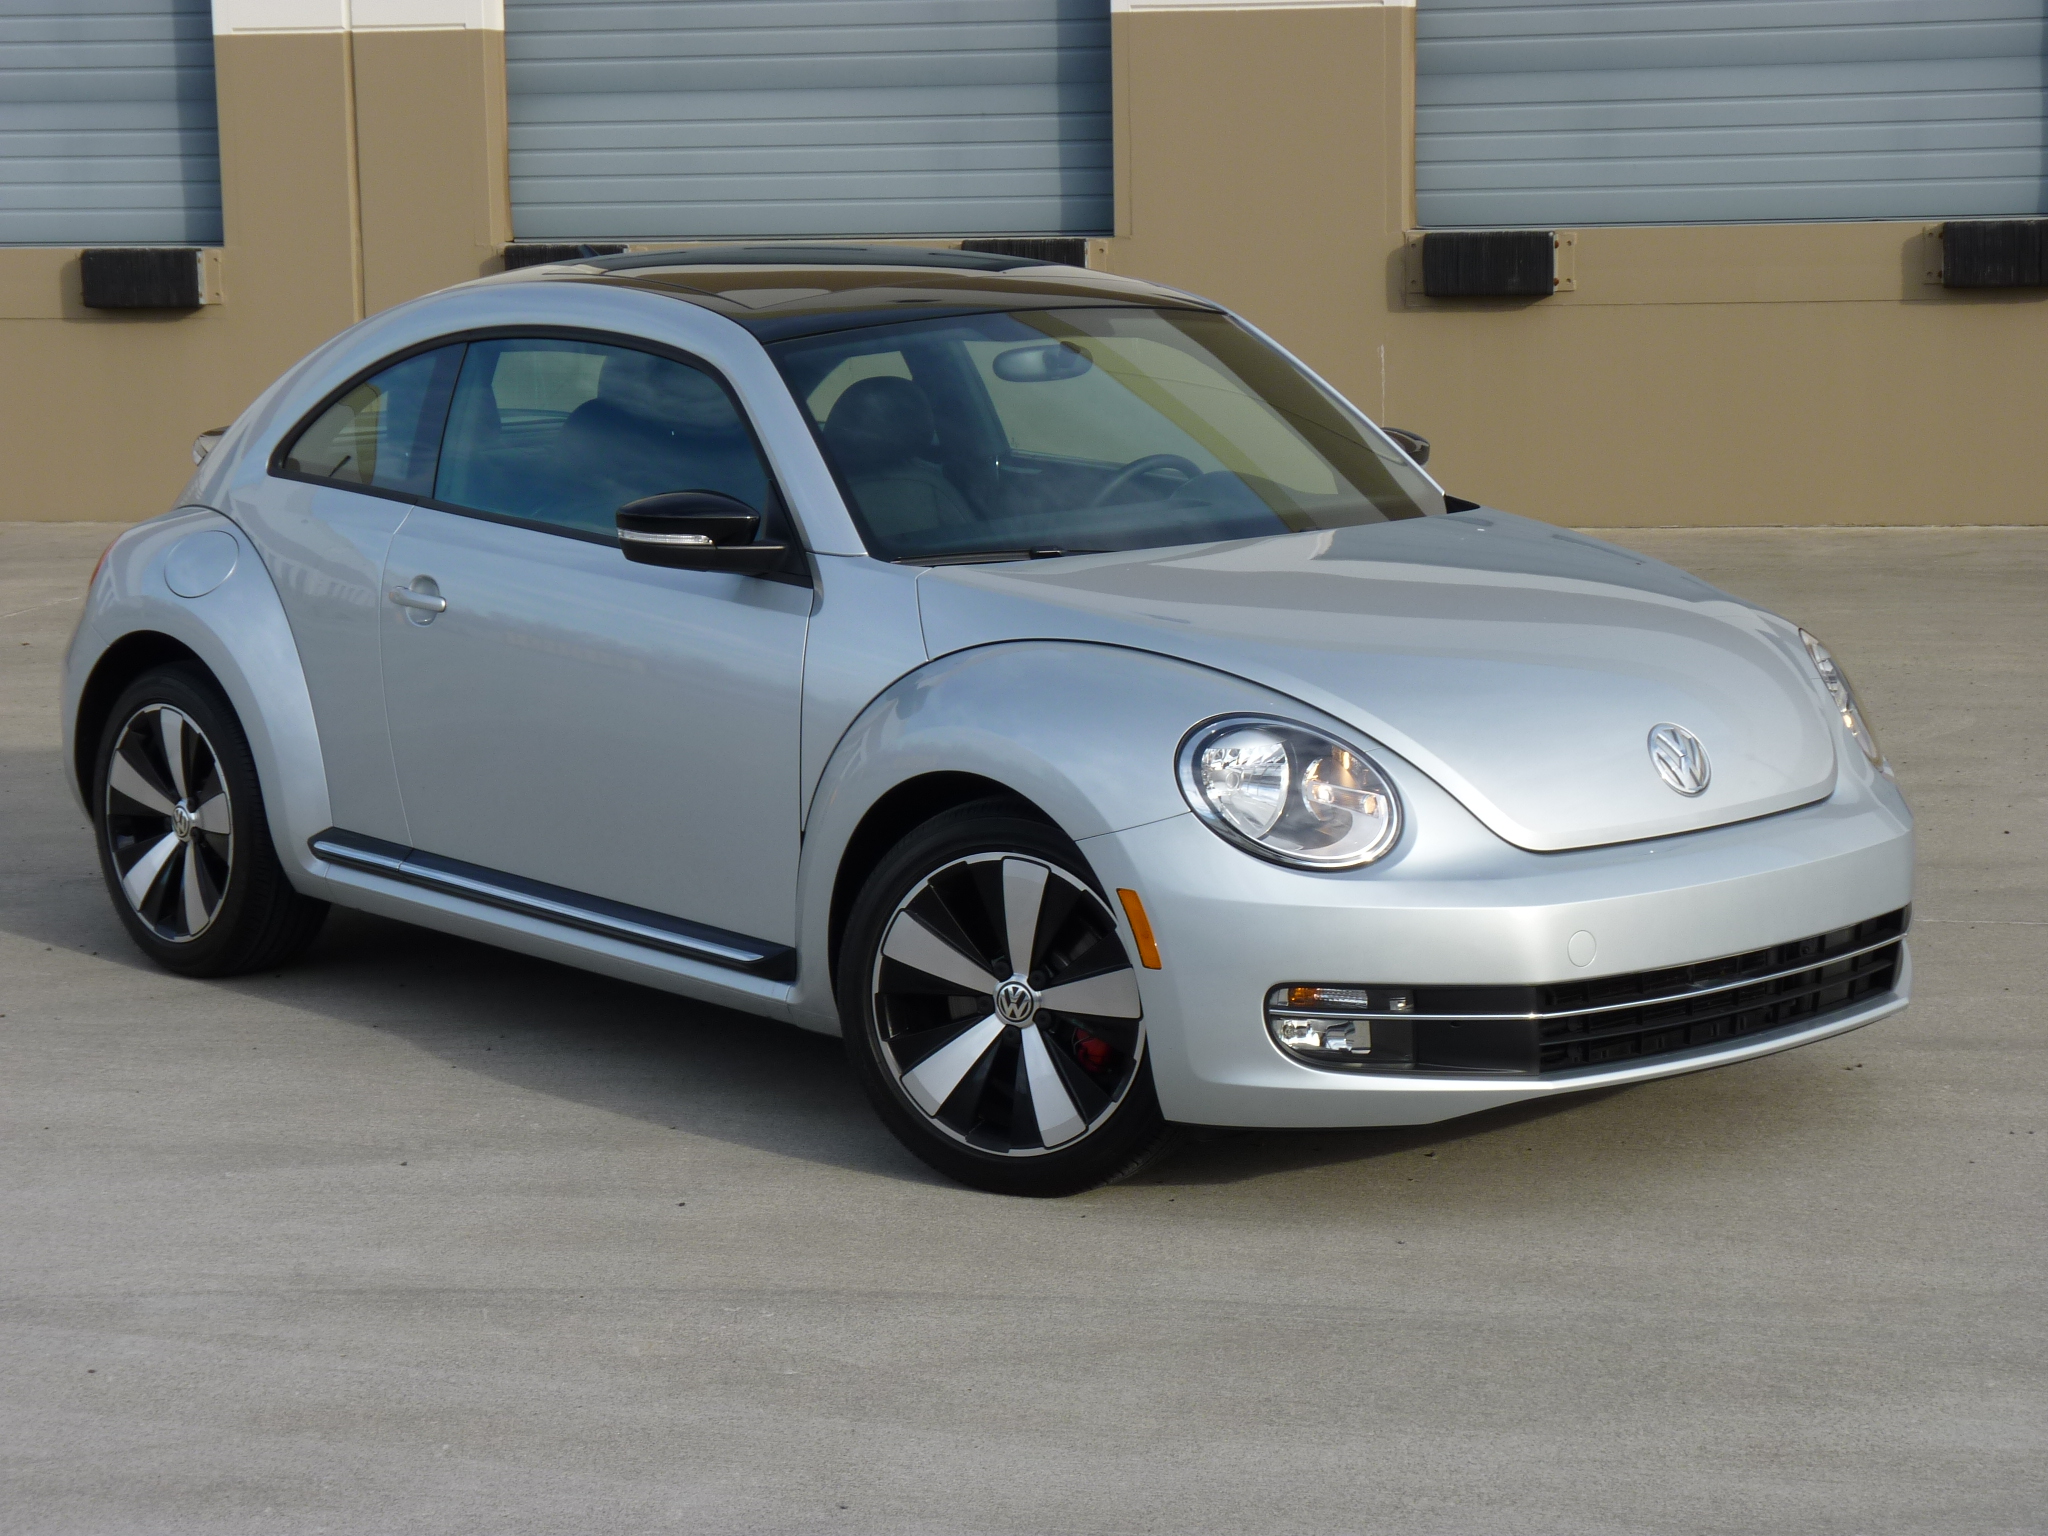 2012 Volkswagen Beetle Turbo Two Minute Review Video